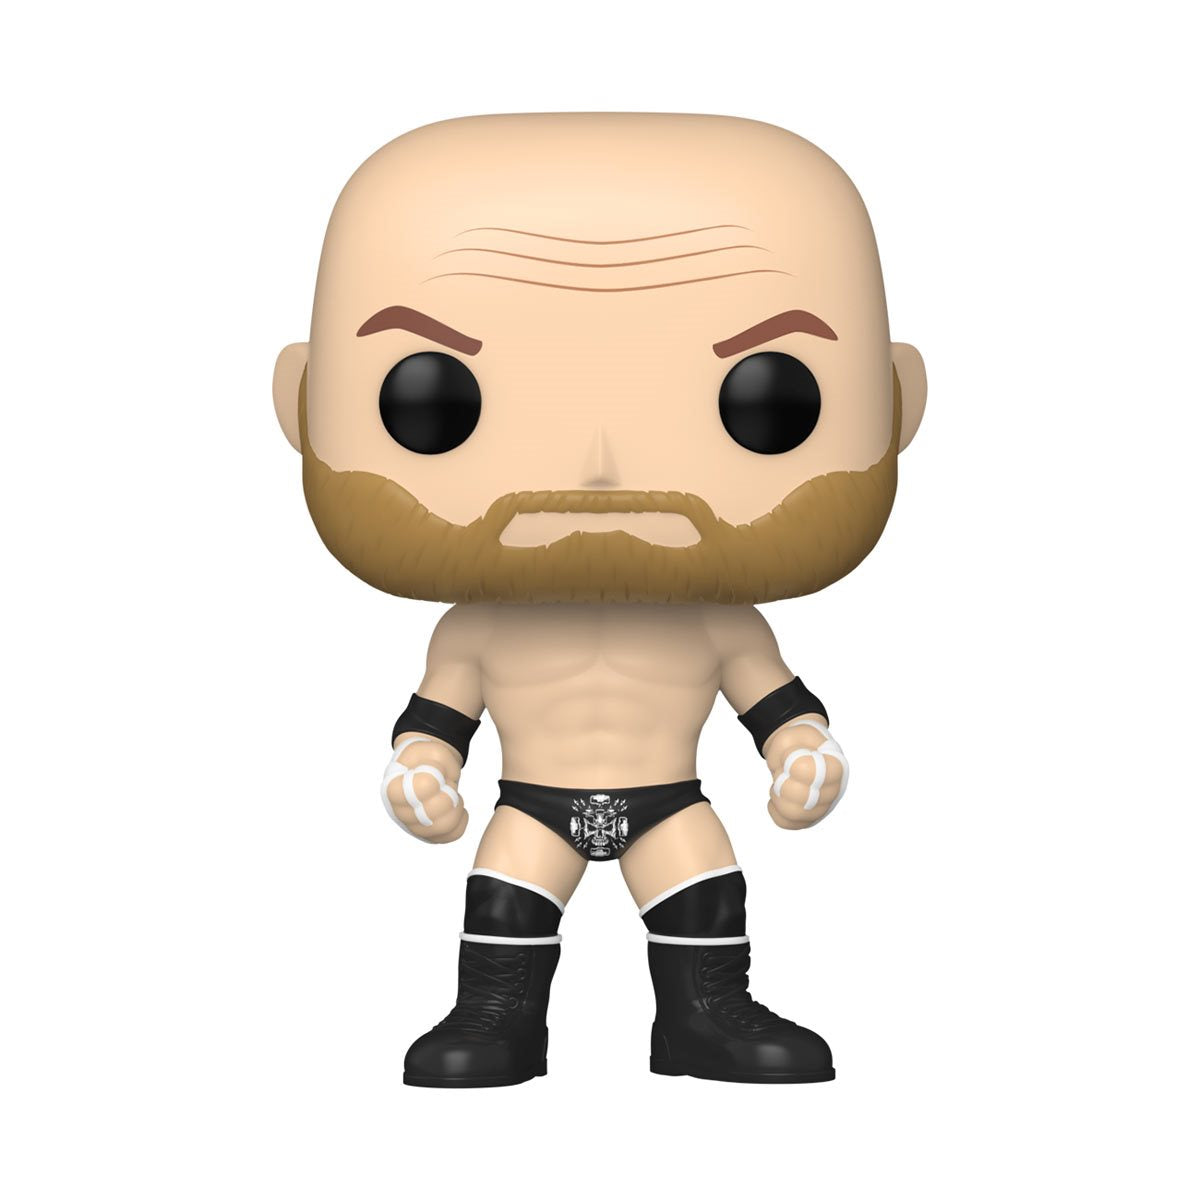 Funko POP! WWE: Triple H and Ronda Rousey 2-Pack